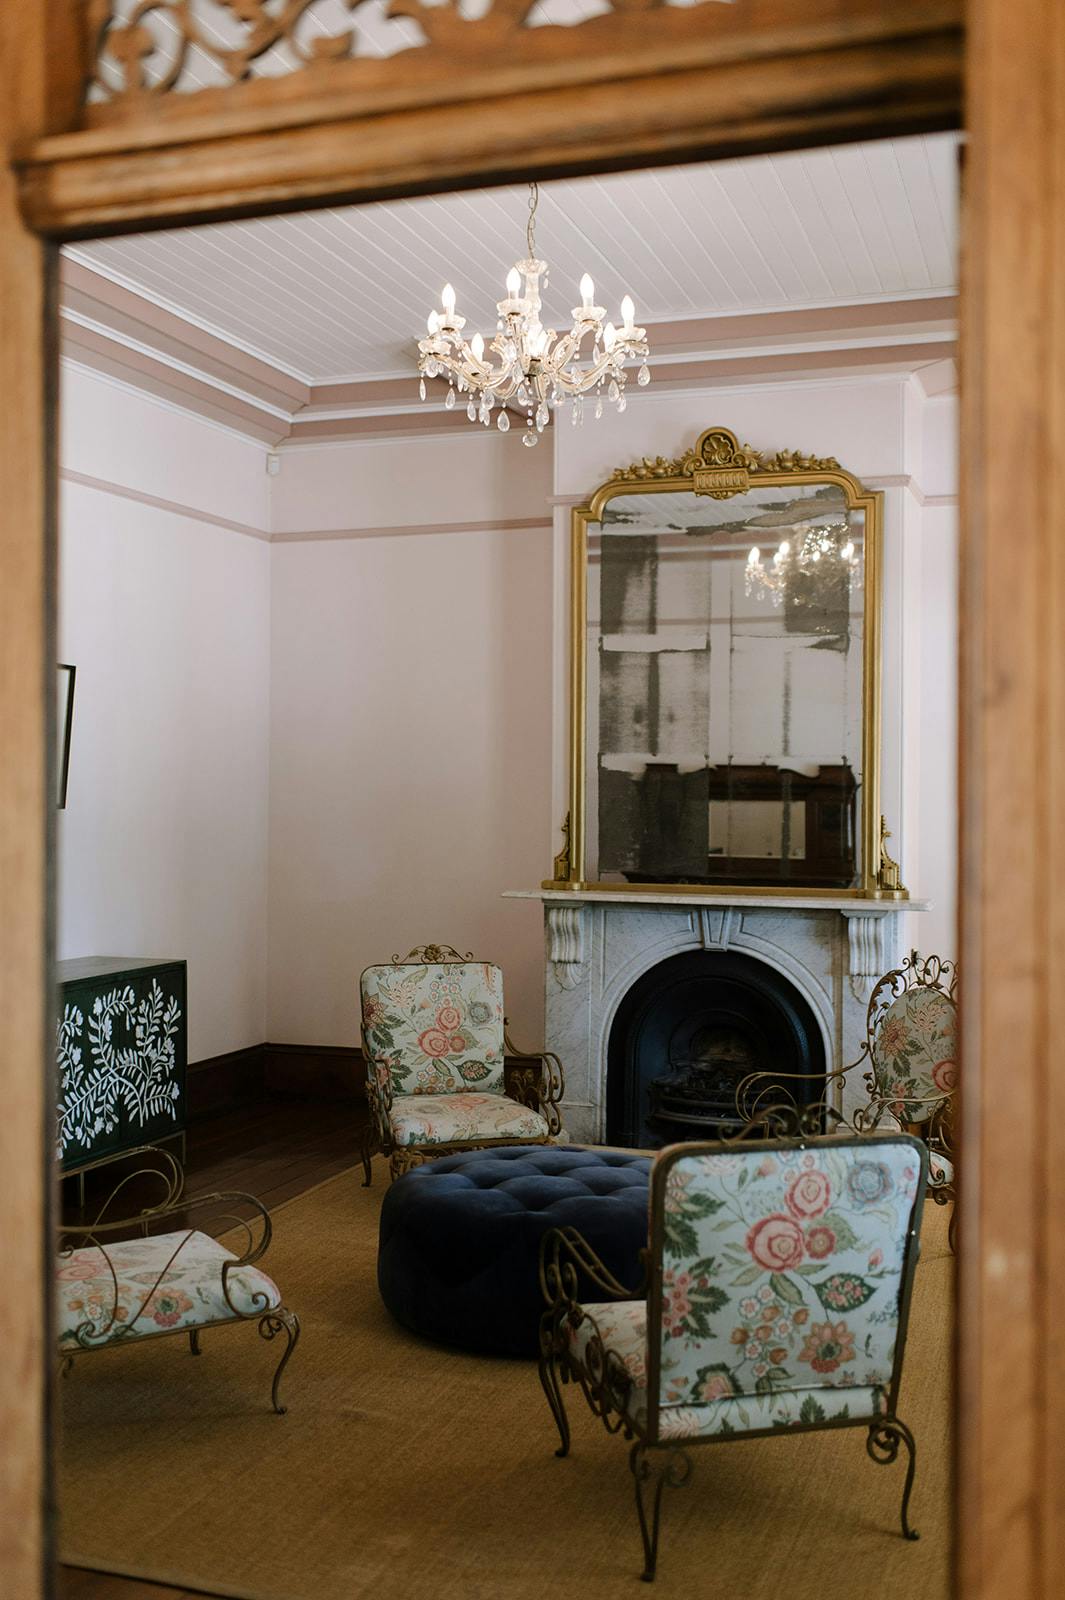 A cozy living room with ornate furniture, including four floral-upholstered chairs surrounding a large blue ottoman. The room features a fireplace with a tall mirror above it and a chandelier hanging from the ceiling. The decor is elegant with a vintage touch.